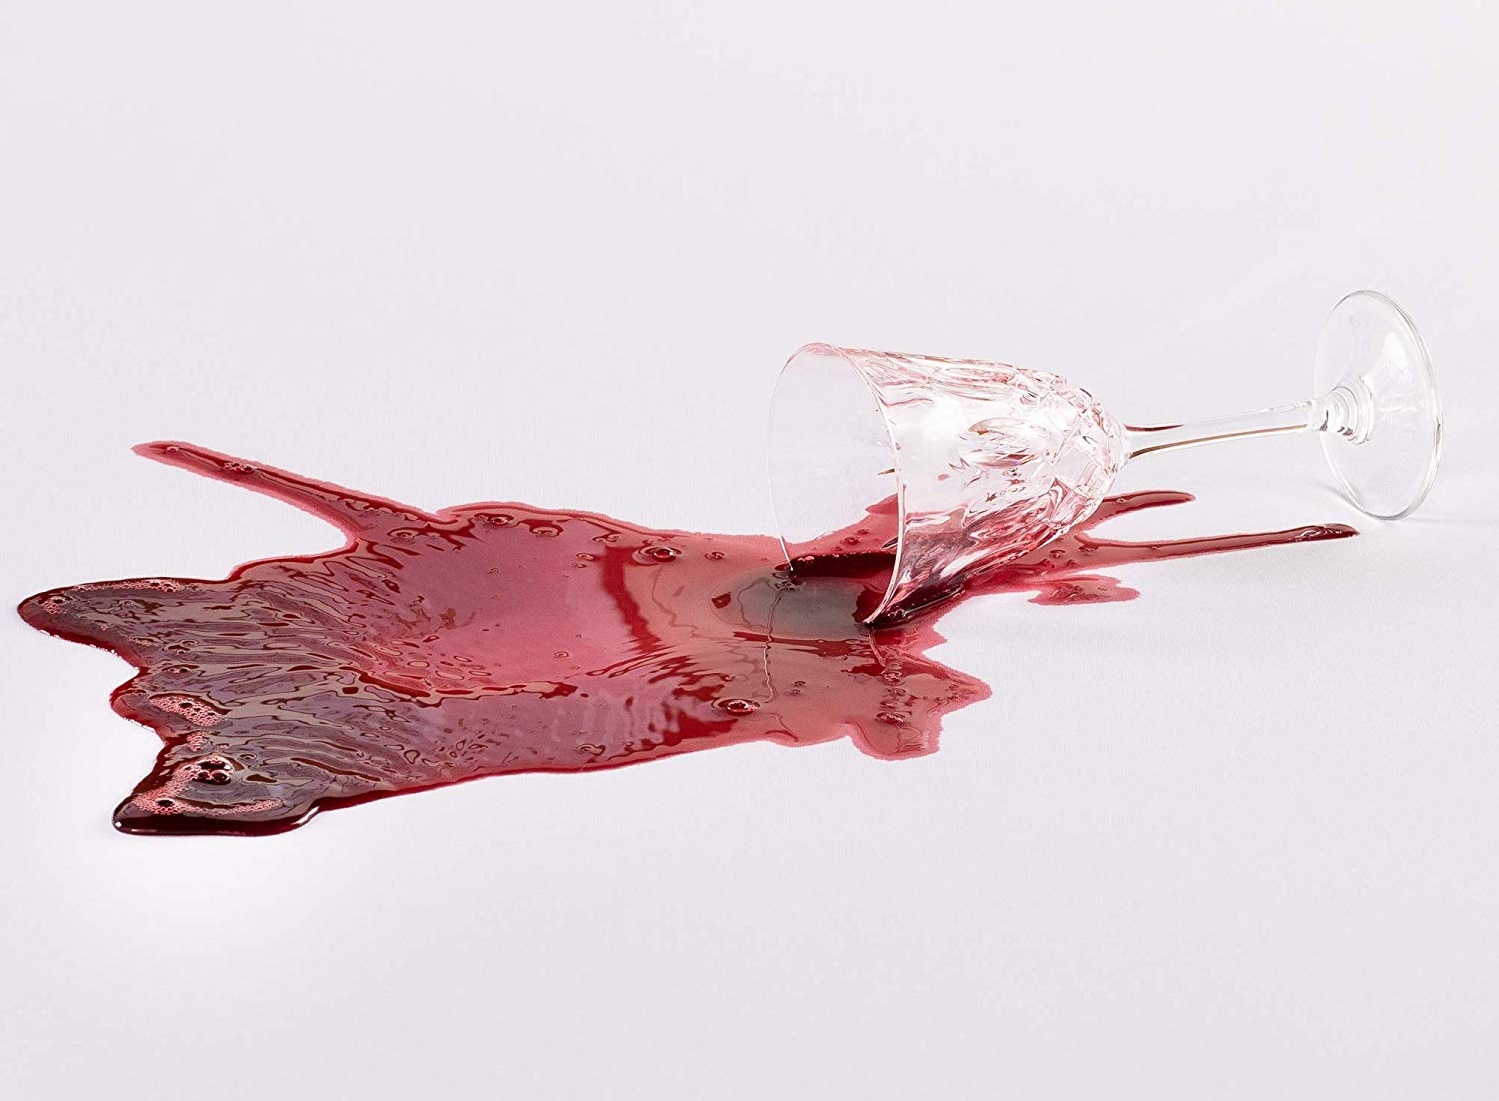 a spilled glass of wine